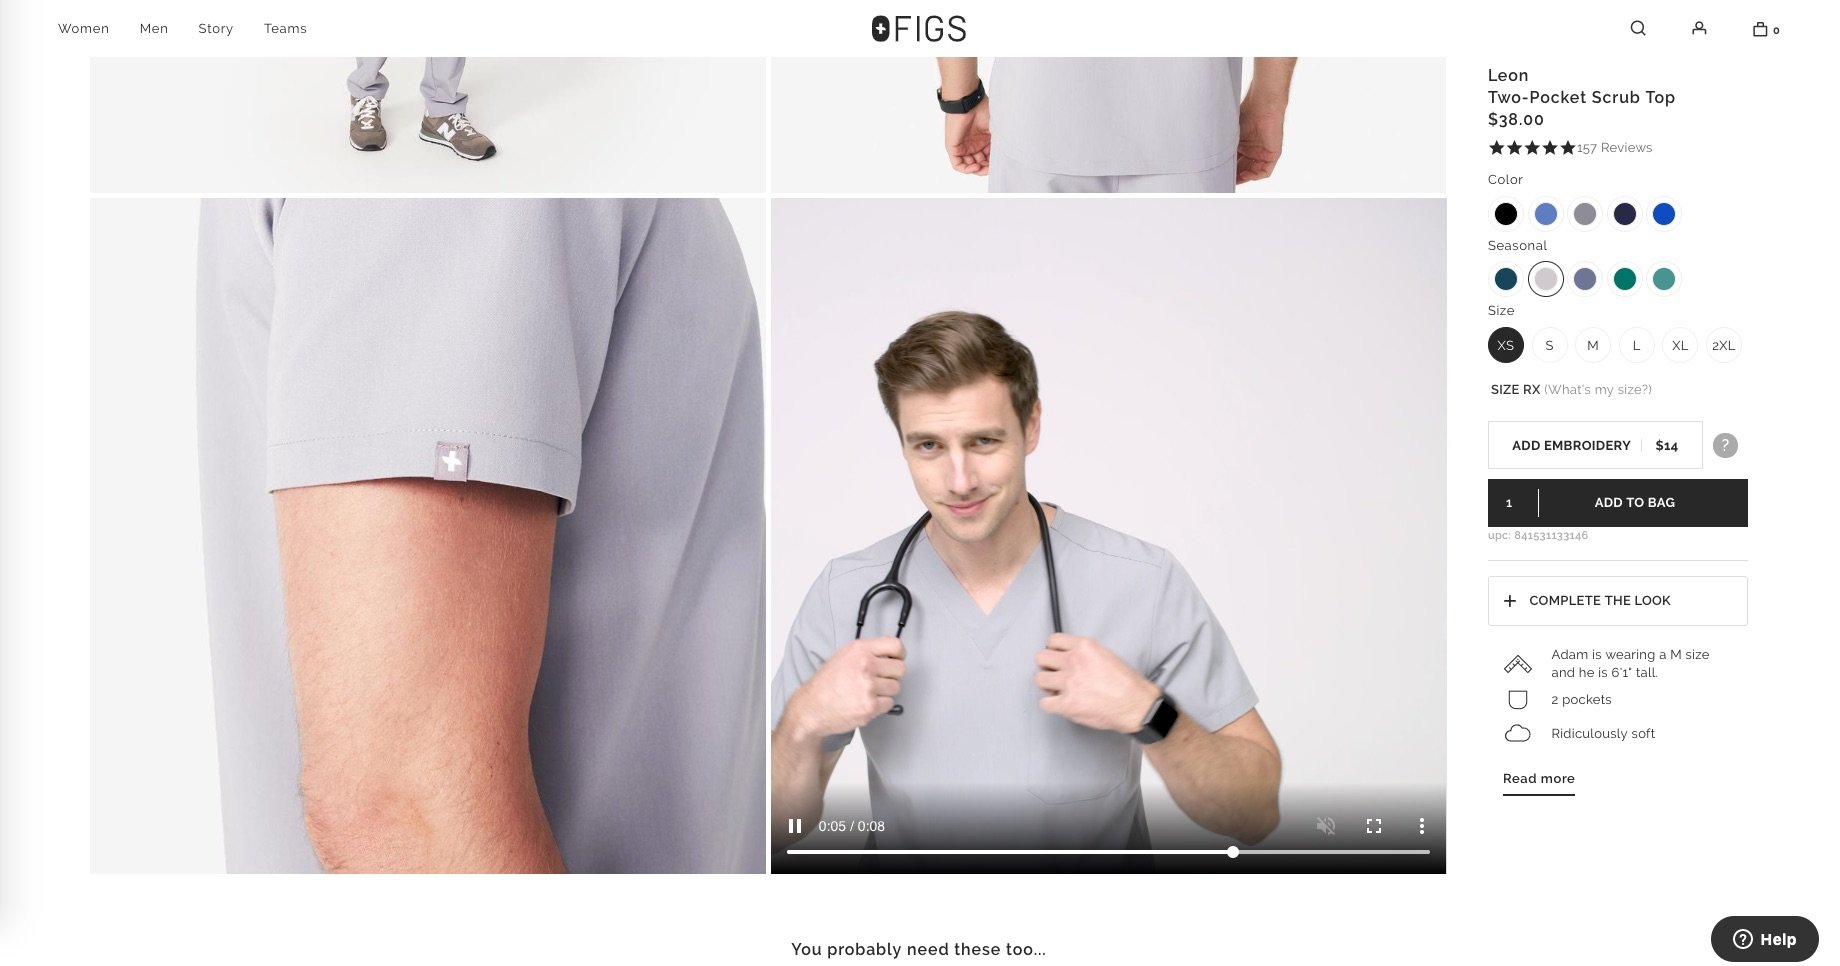 Figs uses a fun, short (8-second) video on a loop that shows a model wearing their product.